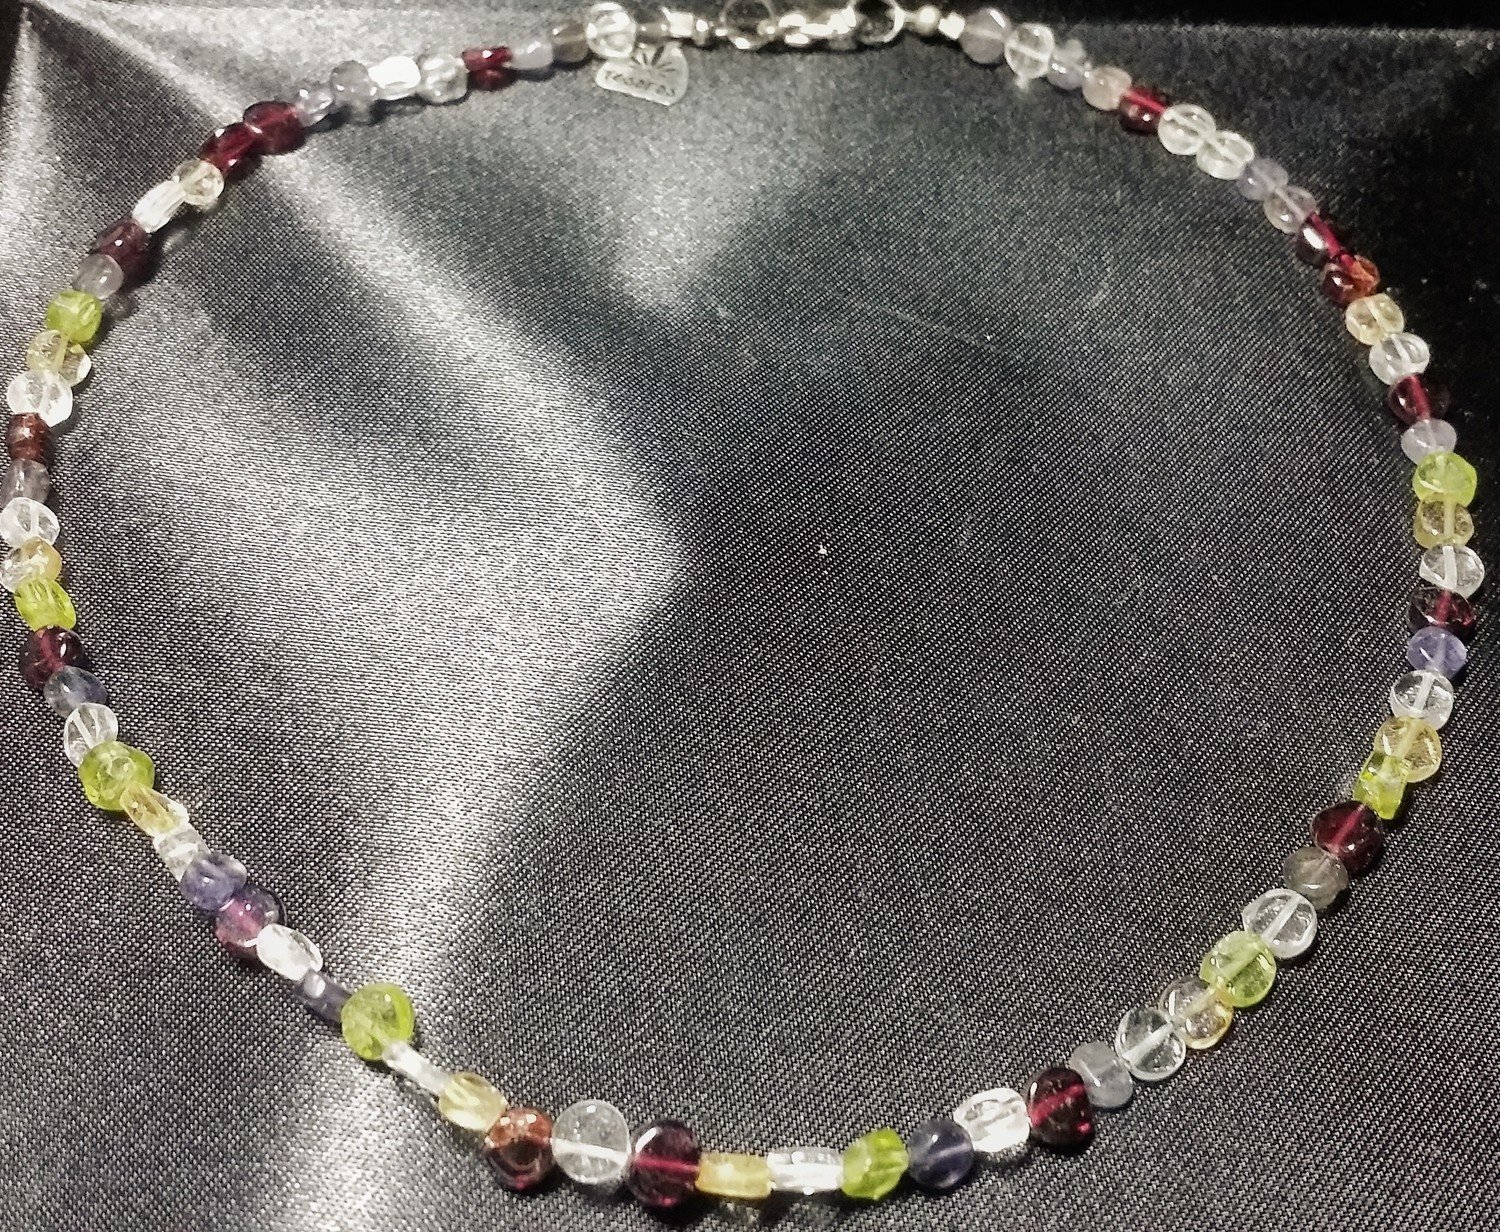 Free Shipping and Just Reduced! Amethyst, Citrine, Rock Crystal, Peridot, and Garnet Necklace